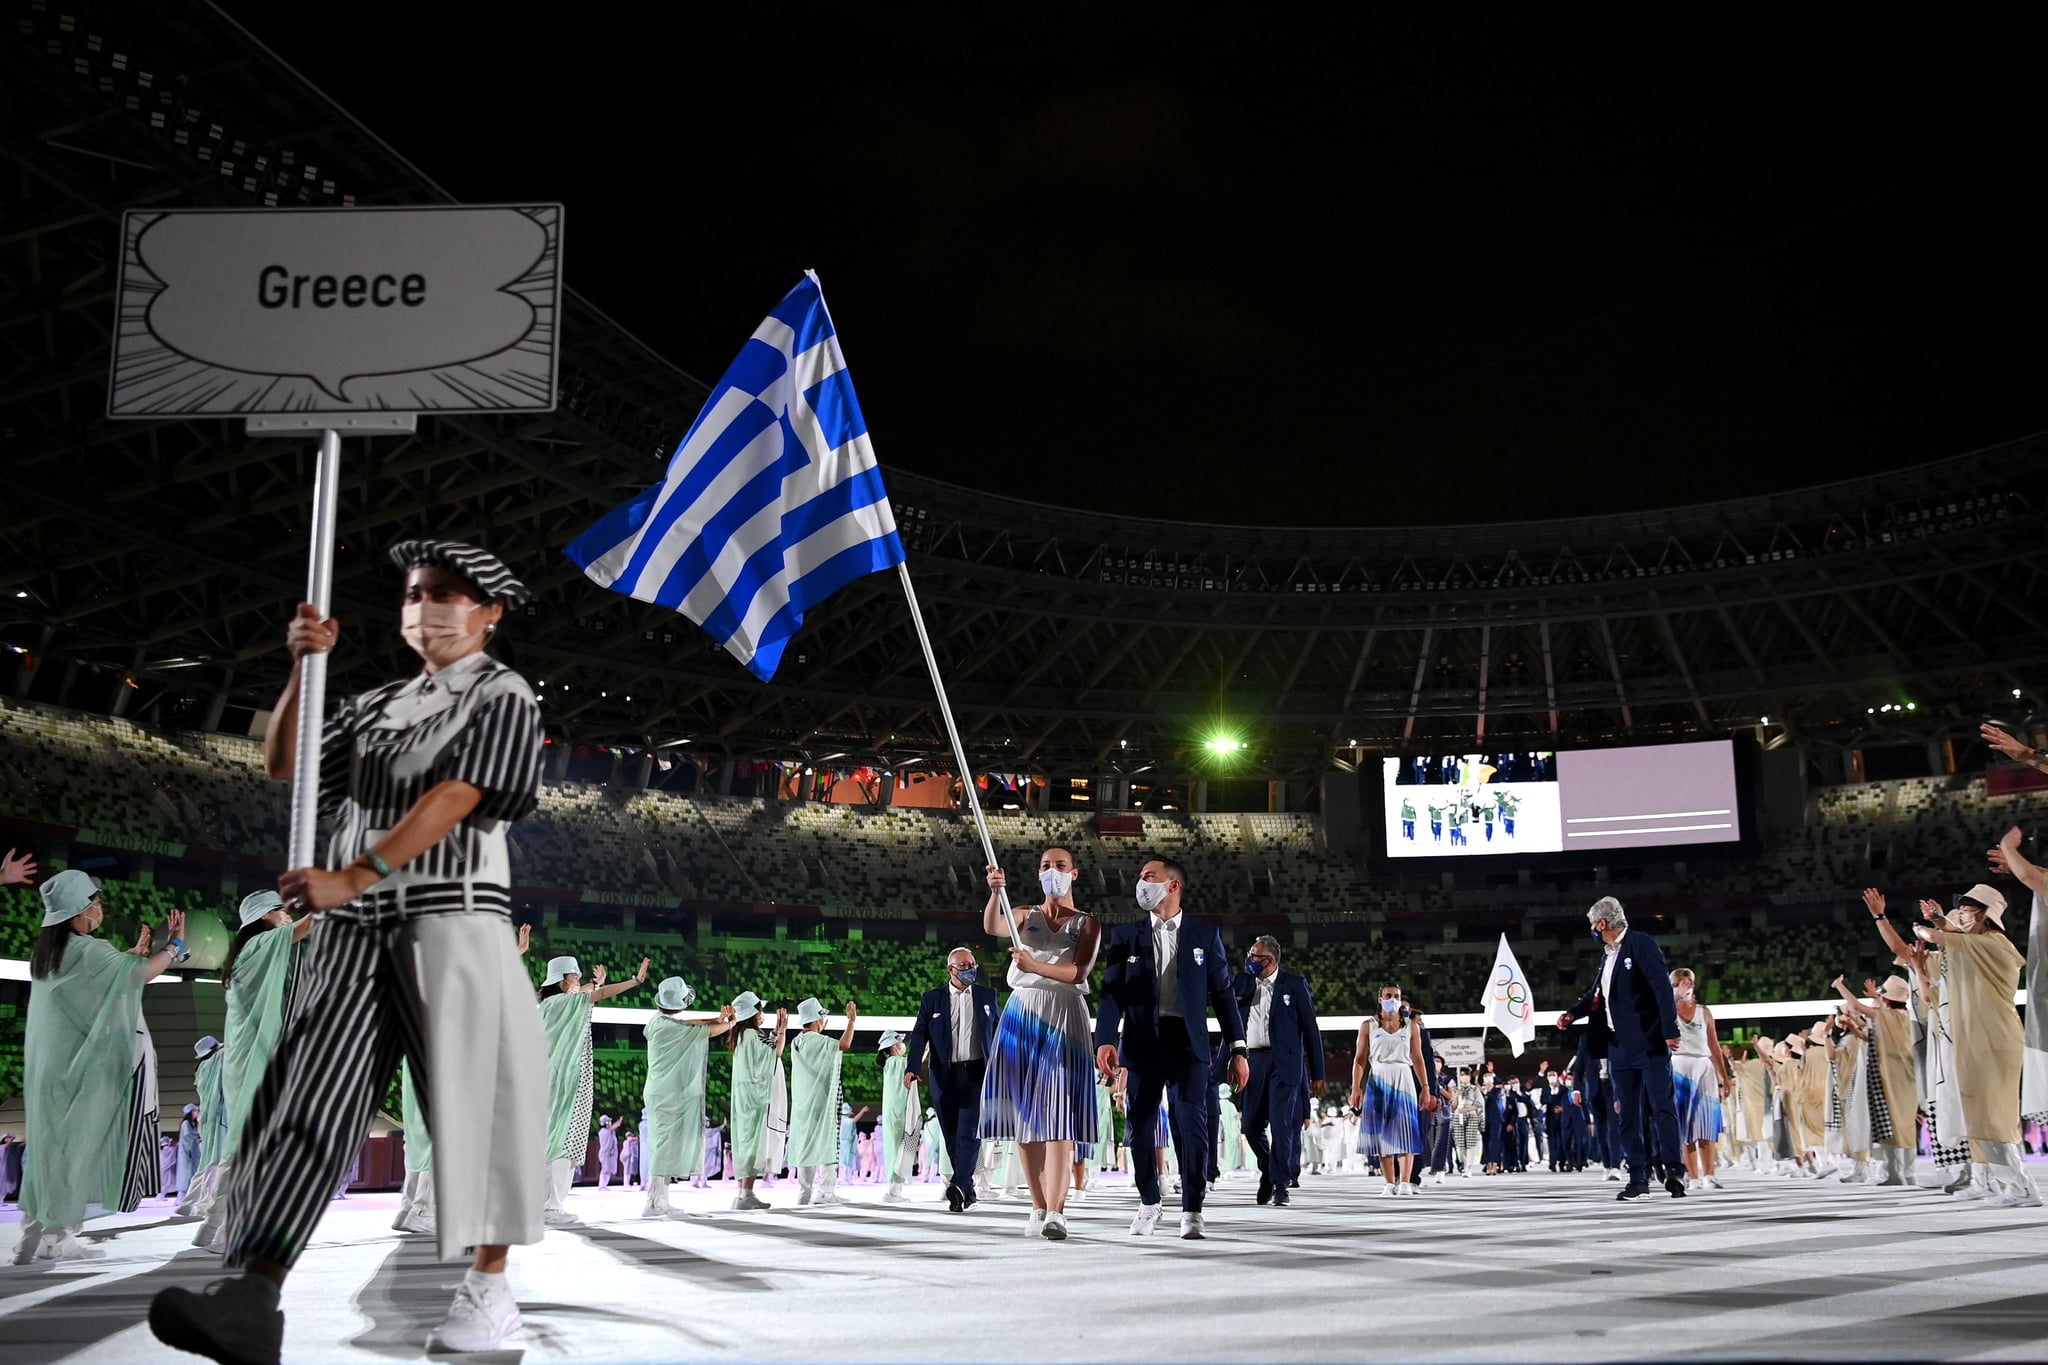 TOKYO, JAPAN - JULY 23: Flag bearers Anna Korakaki and Eleftherios Petrounias of Team Greece lead their team in during the Opening Ceremony of the Tokyo 2020 Olympic Games at Olympic Stadium on July 23, 2021 in Tokyo, Japan. (Photo by Matthias Hangst/Getty Images)